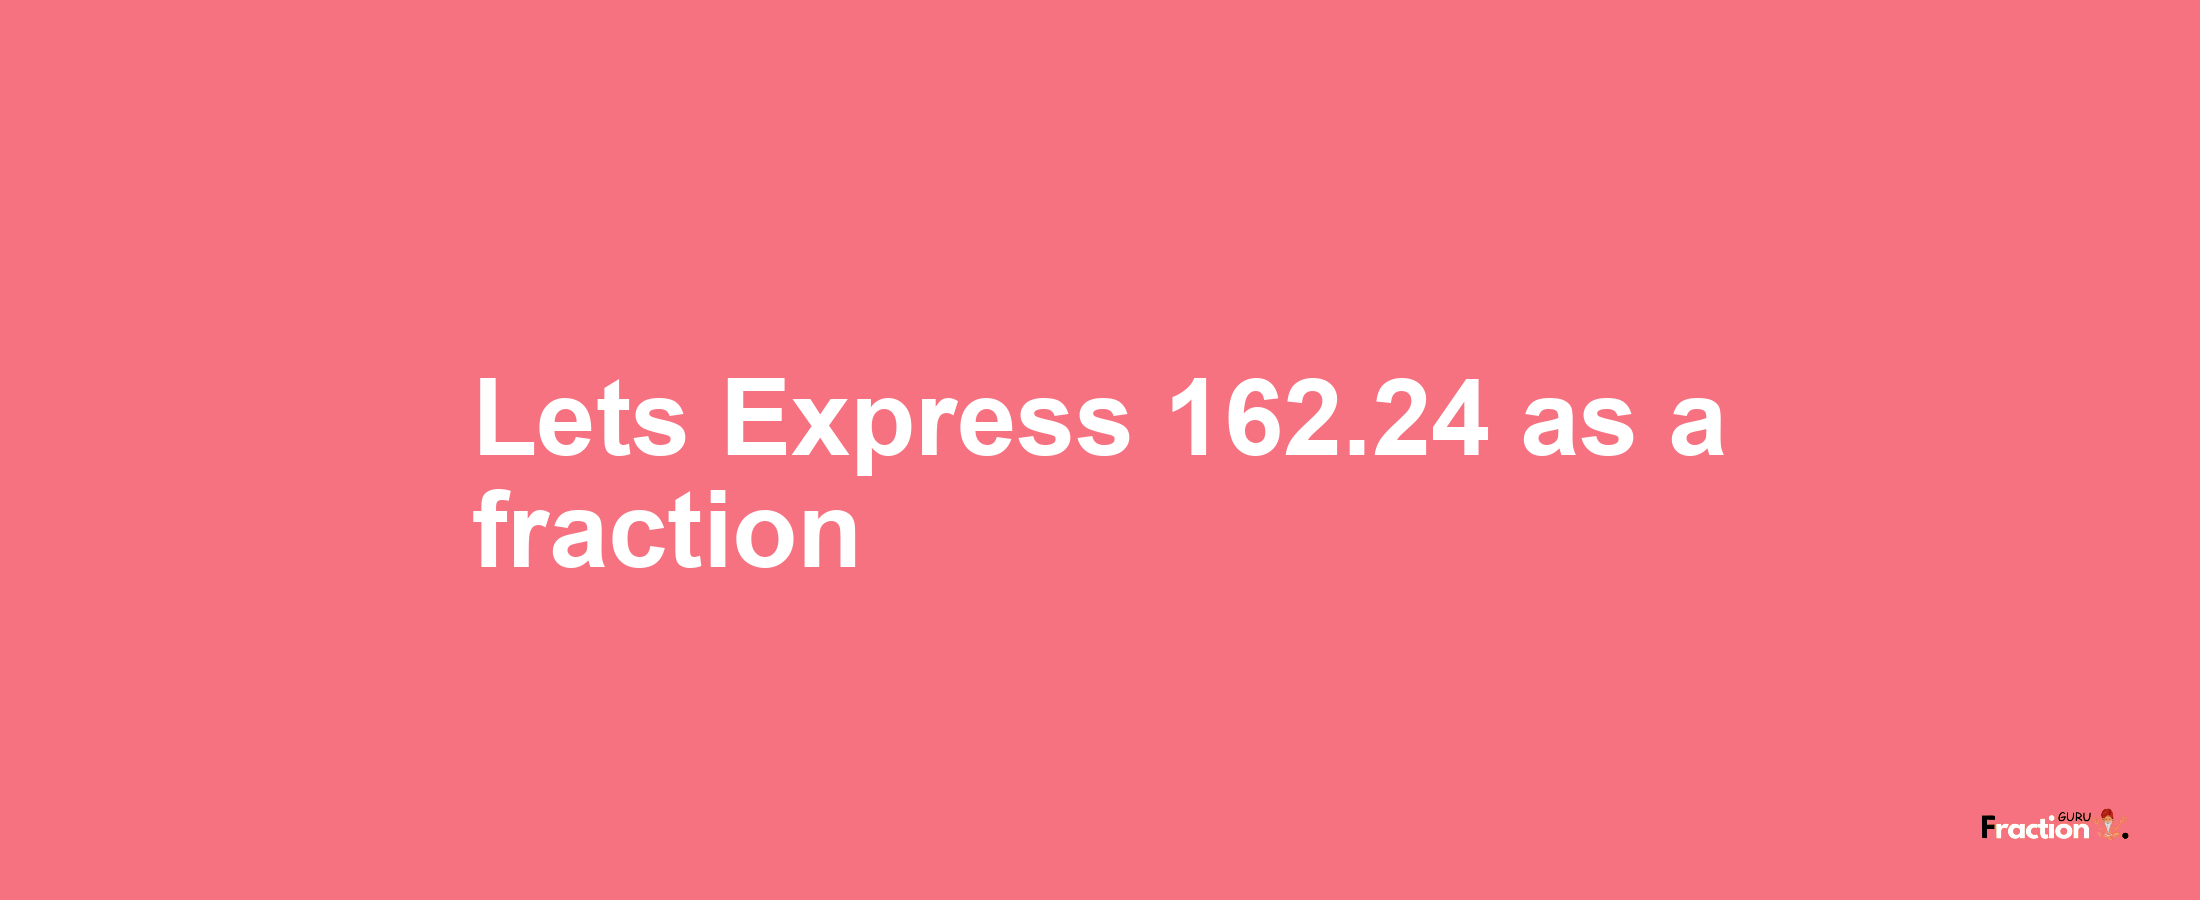 Lets Express 162.24 as afraction